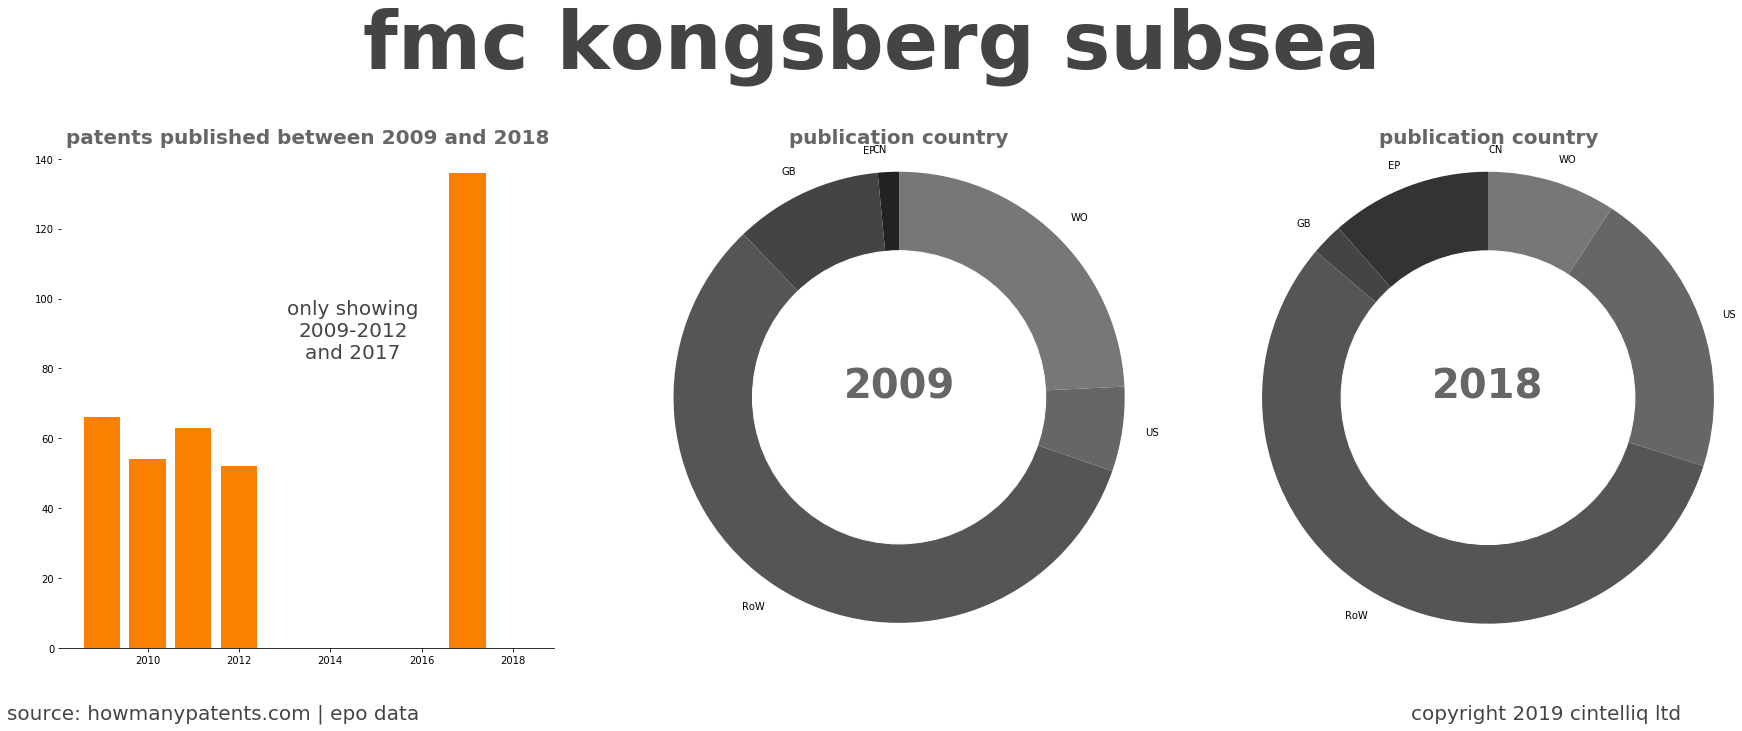 summary of patents for Fmc Kongsberg Subsea